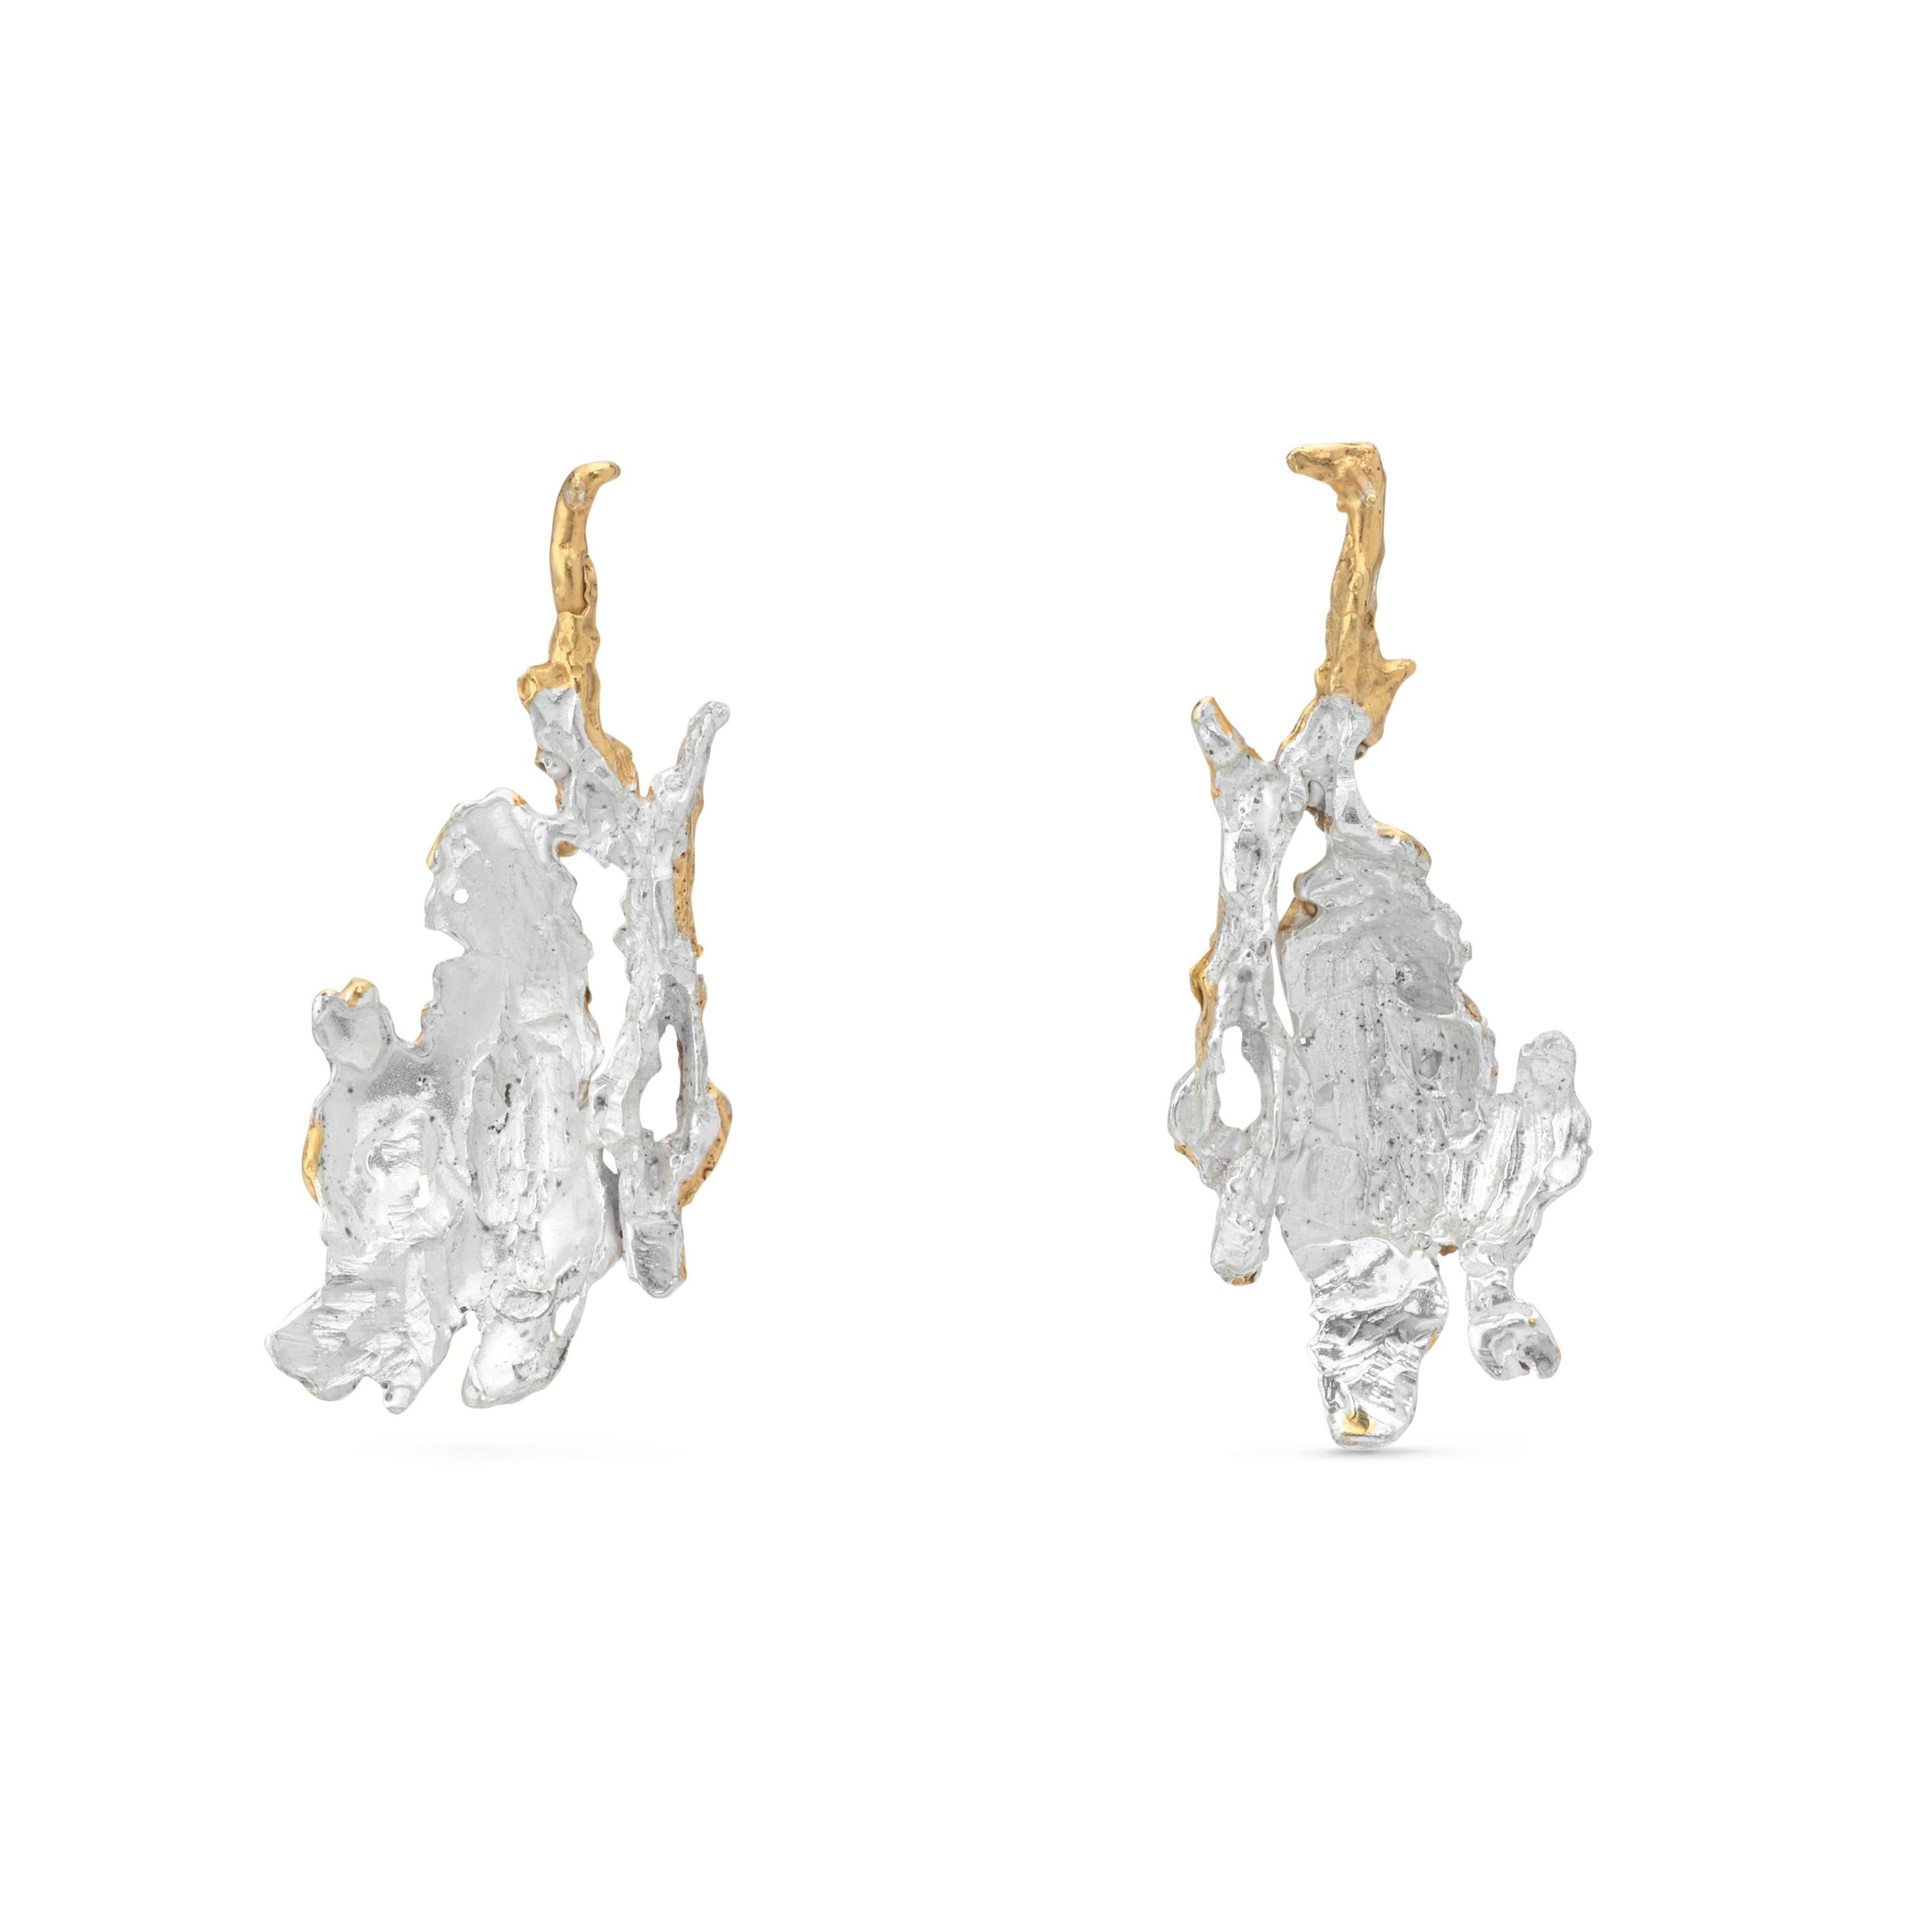 The Sequoia is a giant redwood tree, one of the oldest and tallest living things to inhabit the forests of North America. The shapes of these carefully-handcrafted earrings seem to clamber upwards, like a Sequioa towering above the canopy, while